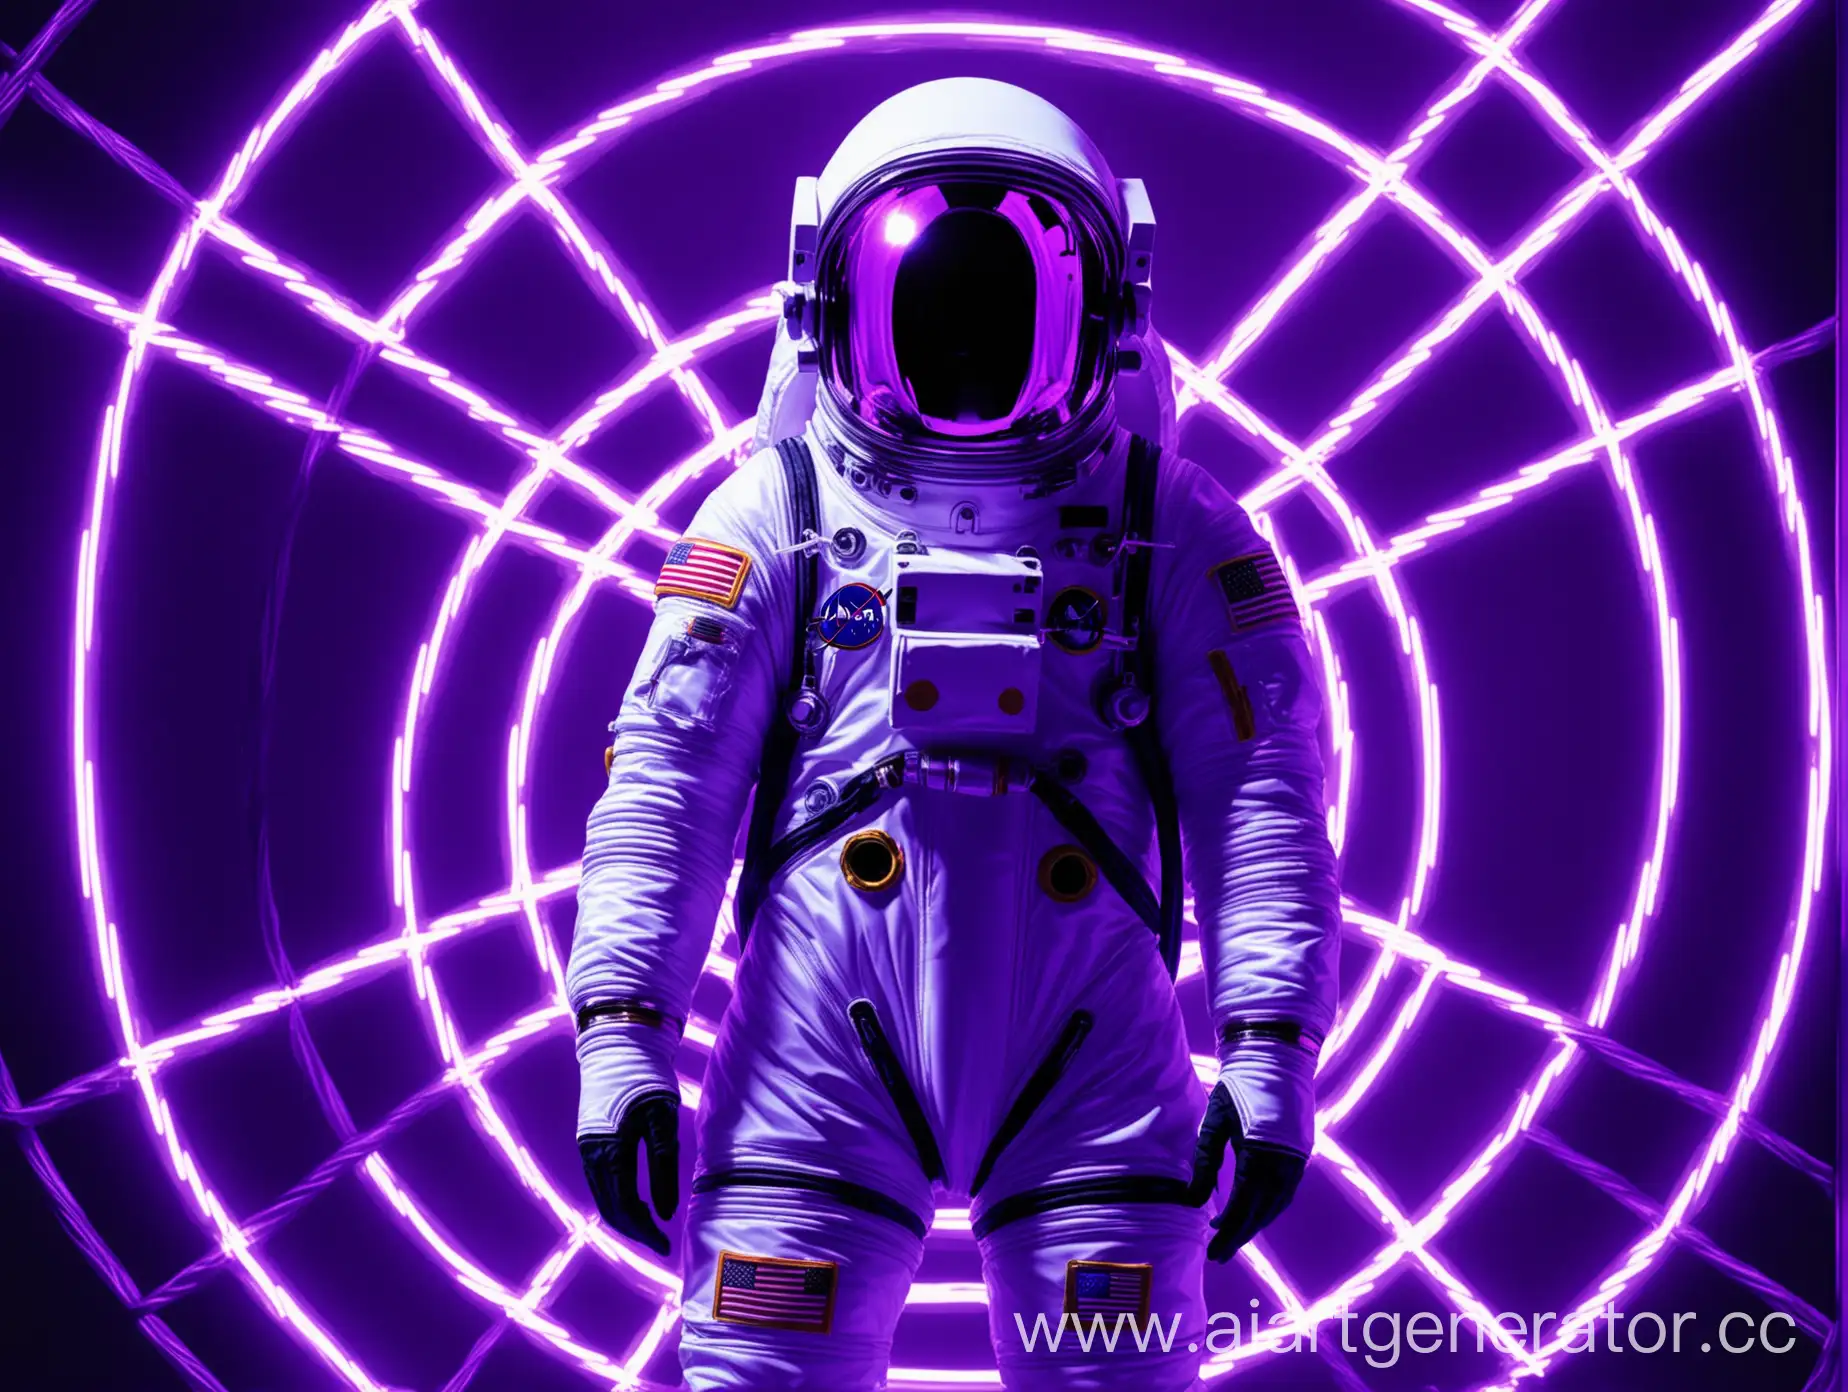 Astronaut-in-Space-Suit-Surrounded-by-Purple-Neon-Lights